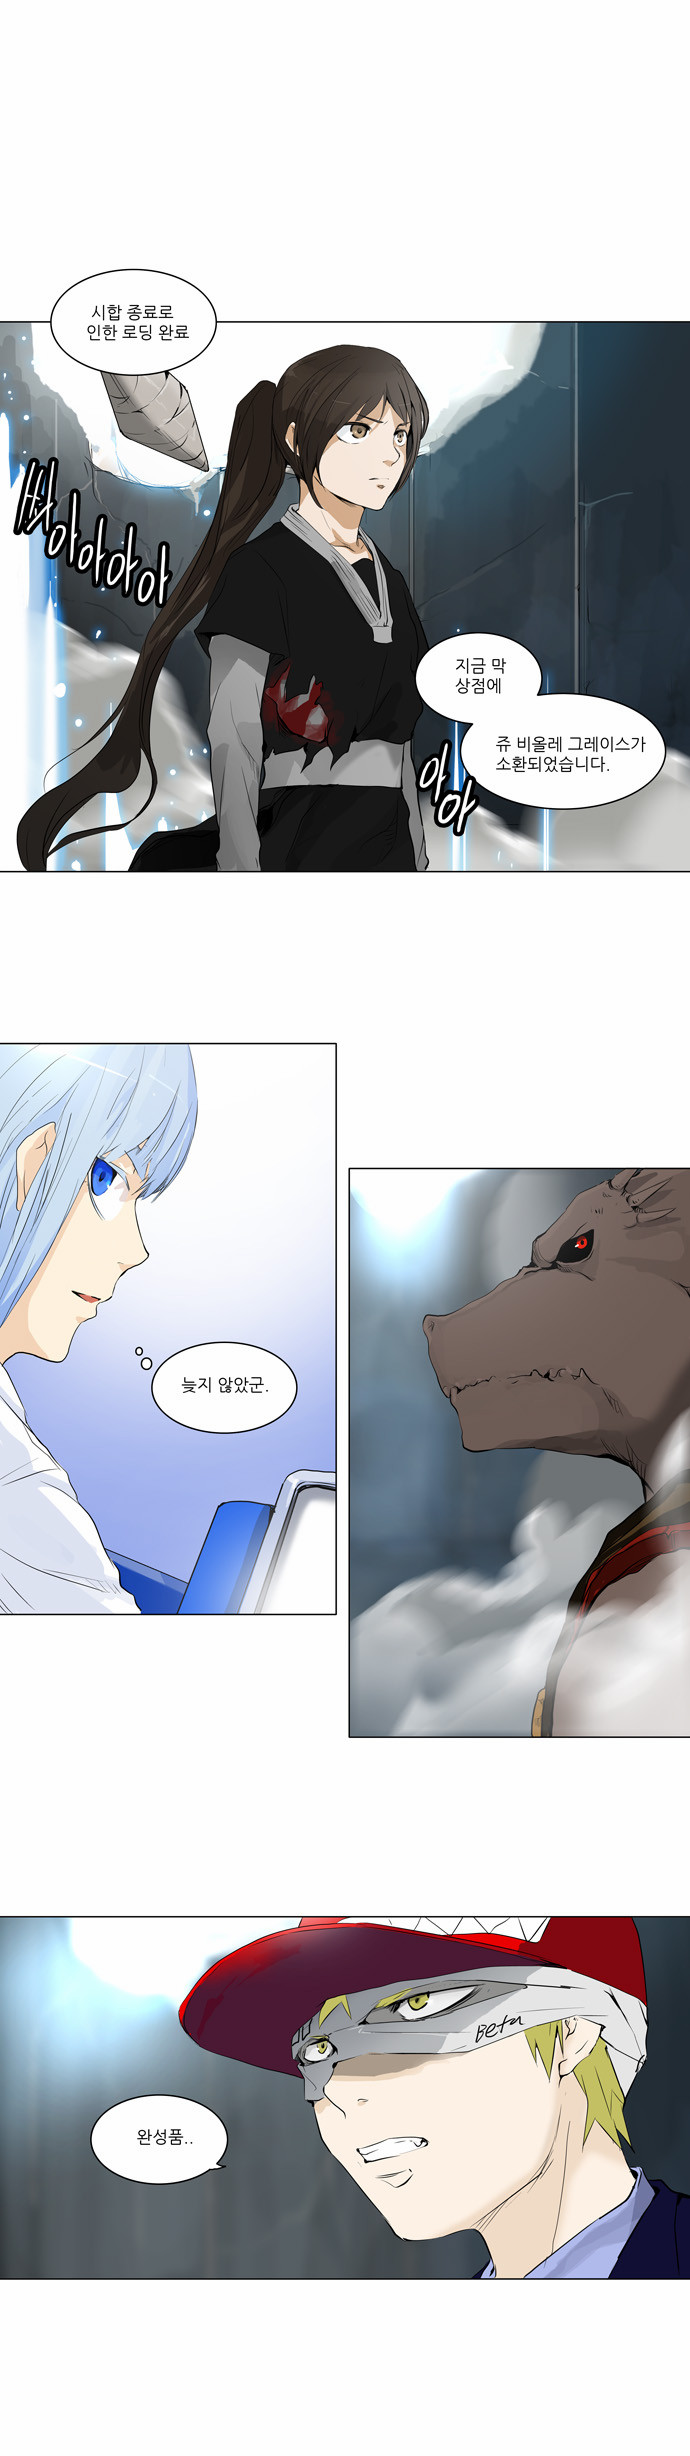 Tower of God - Chapter 177 - Page 1